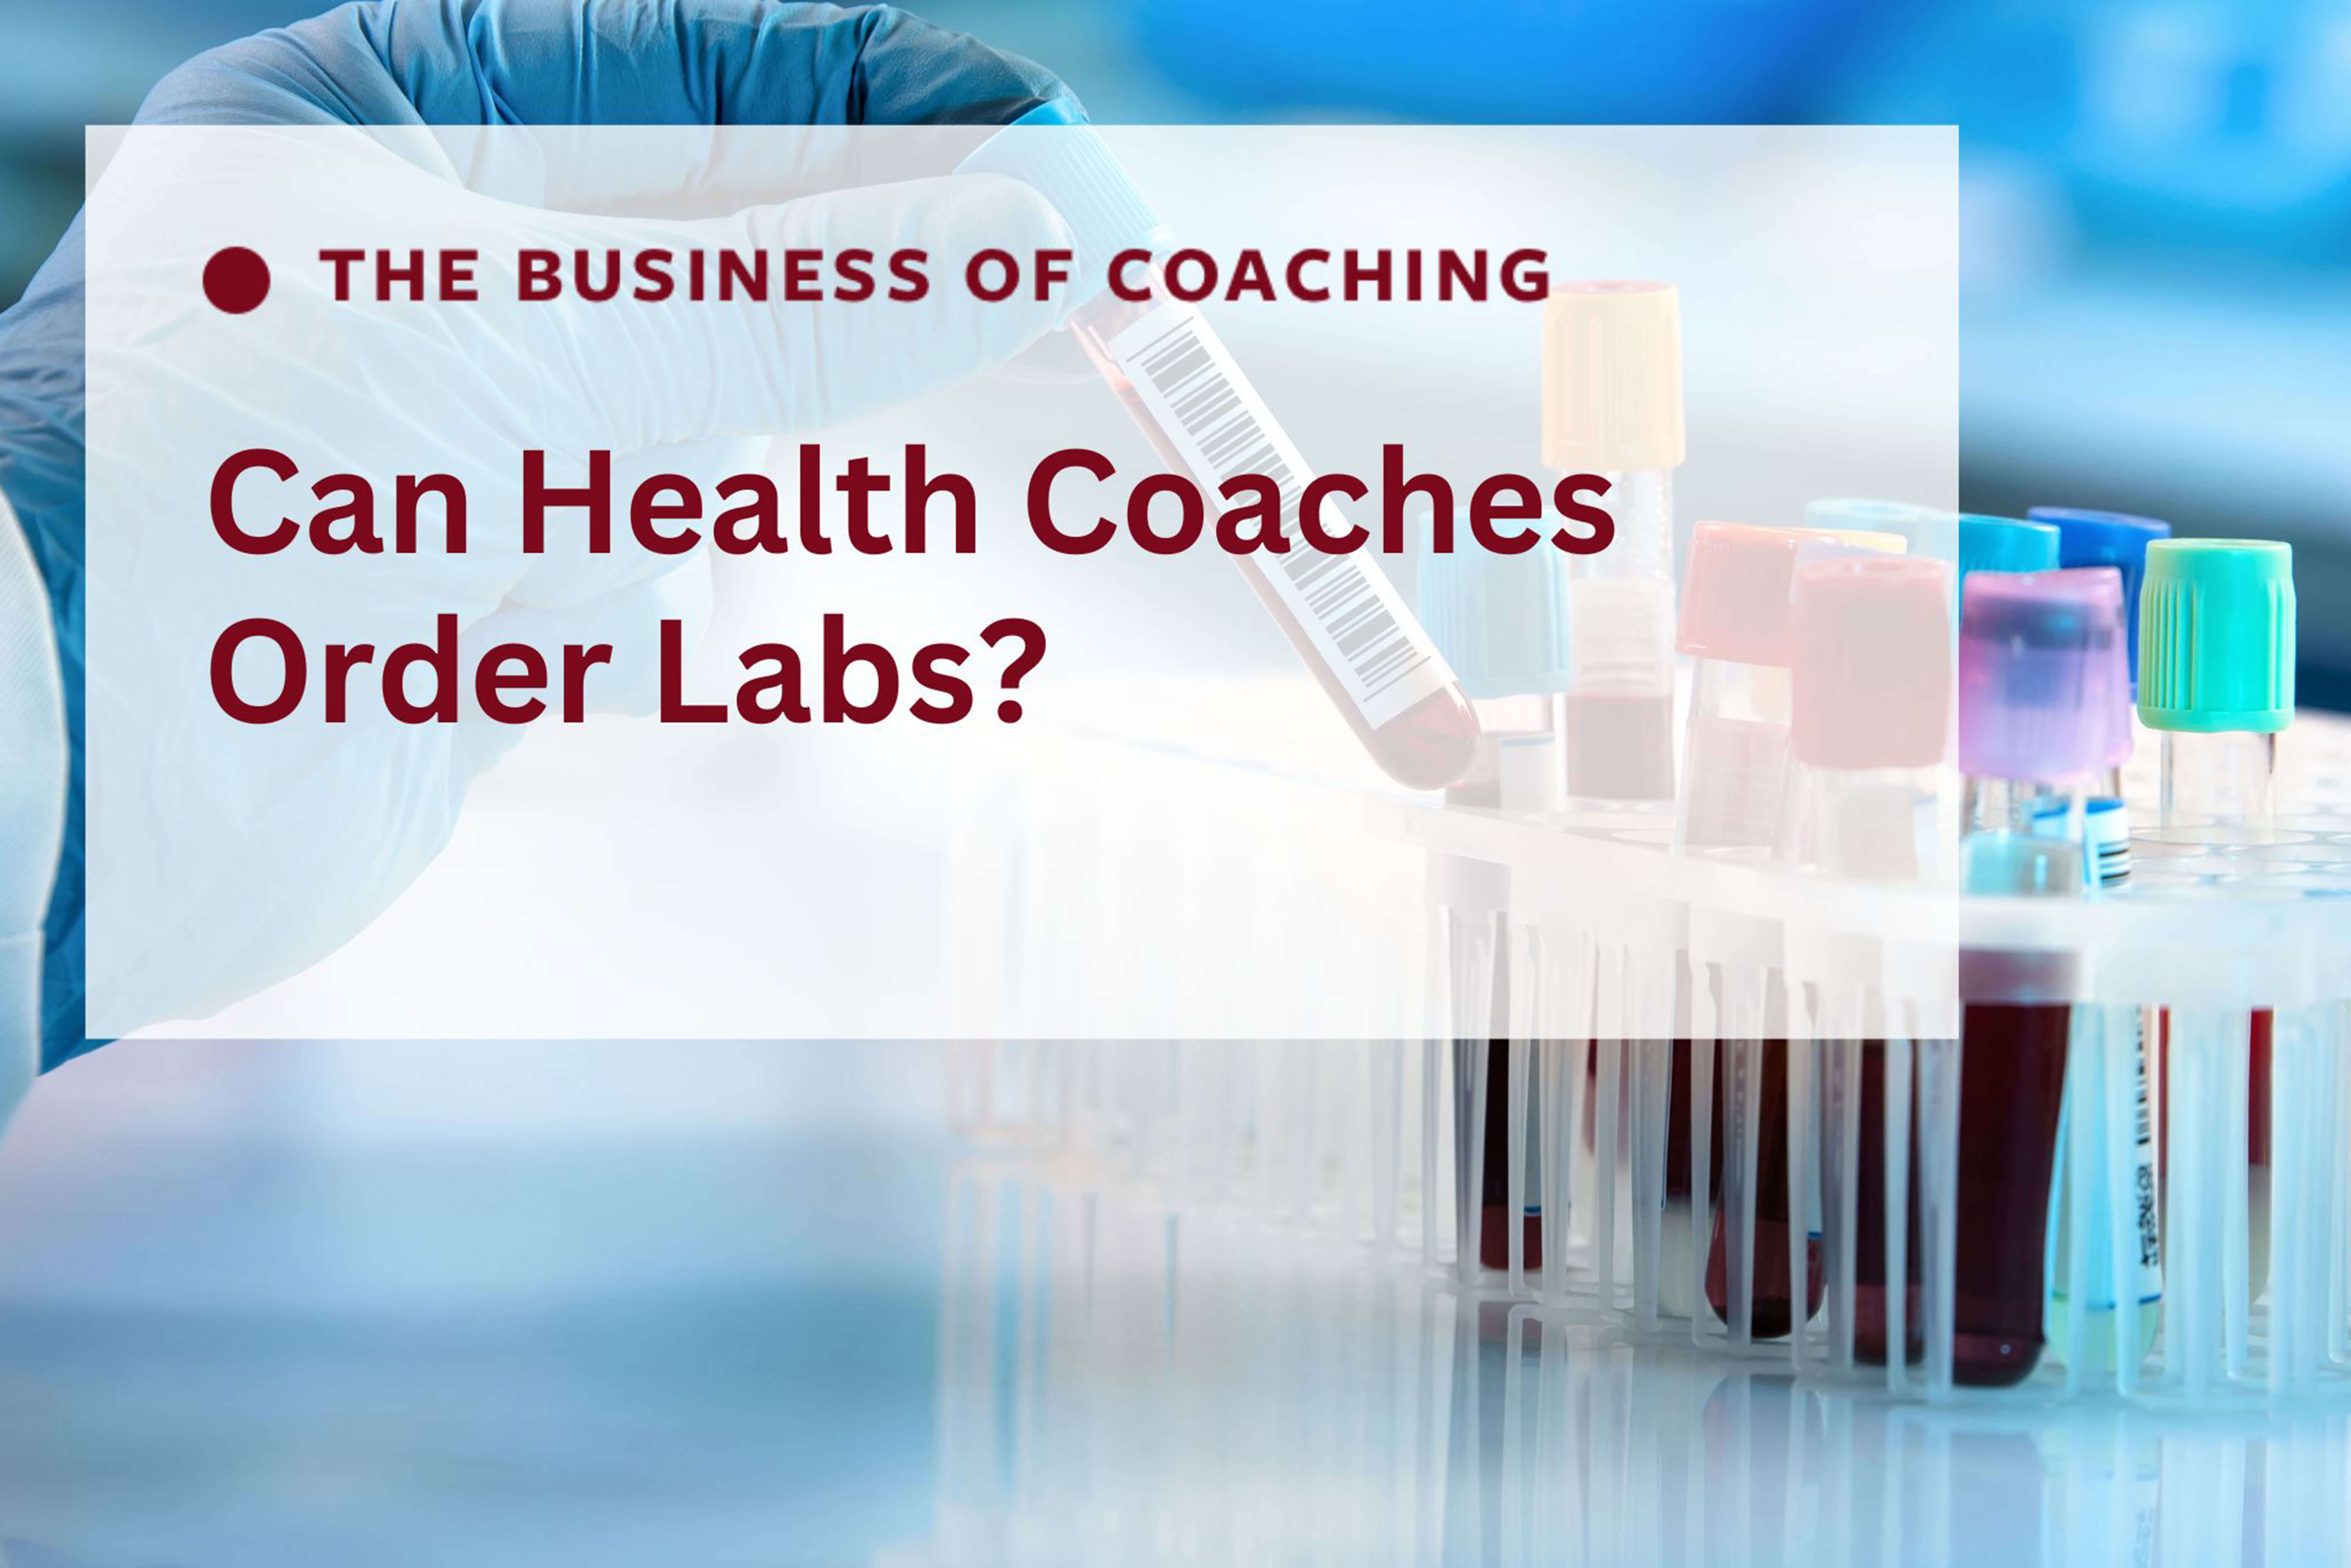 Can health coaches order labs?